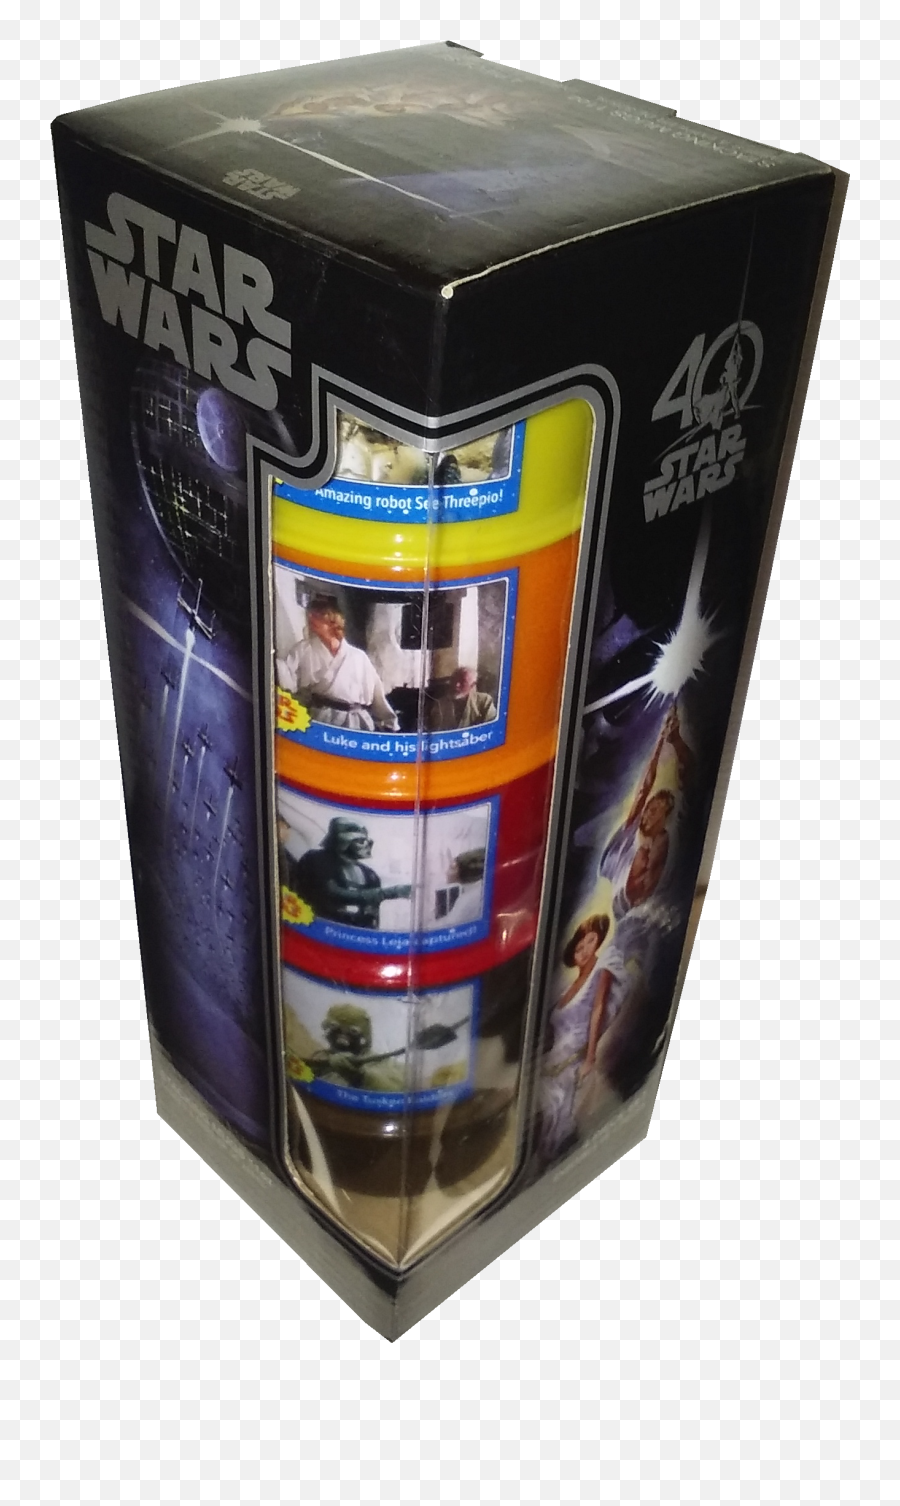 Thelogbookcom Toybox U2013 A Museum Of Toys Action Figures And Emoji,Star Wars 40th Anniversary Logo